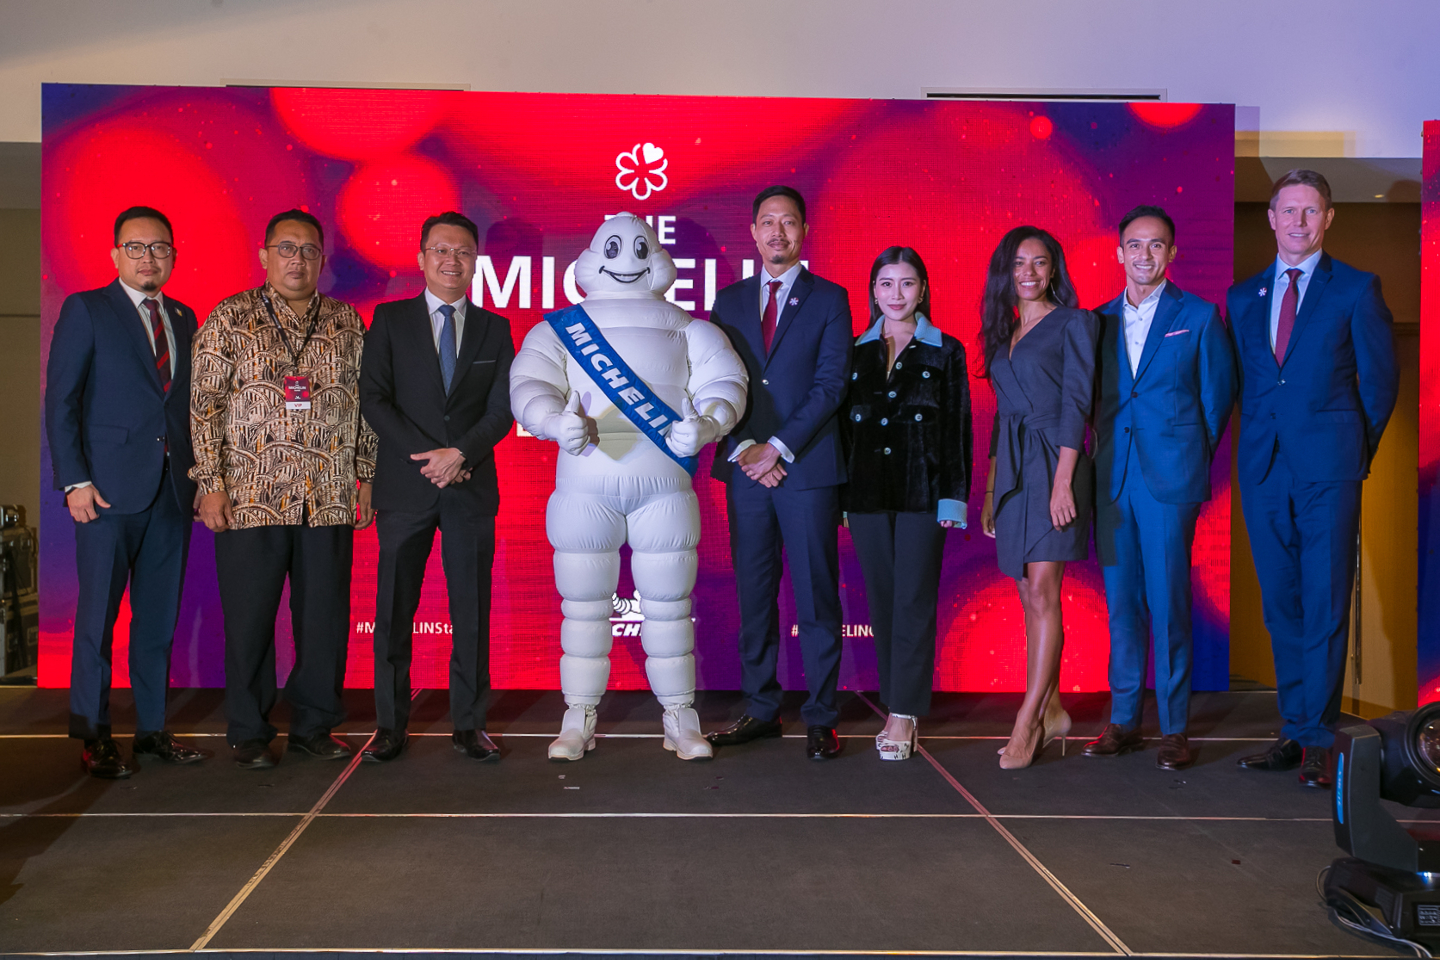 Michelin Guide debuts in KL and Penang this December 2022 | Options, The Edge